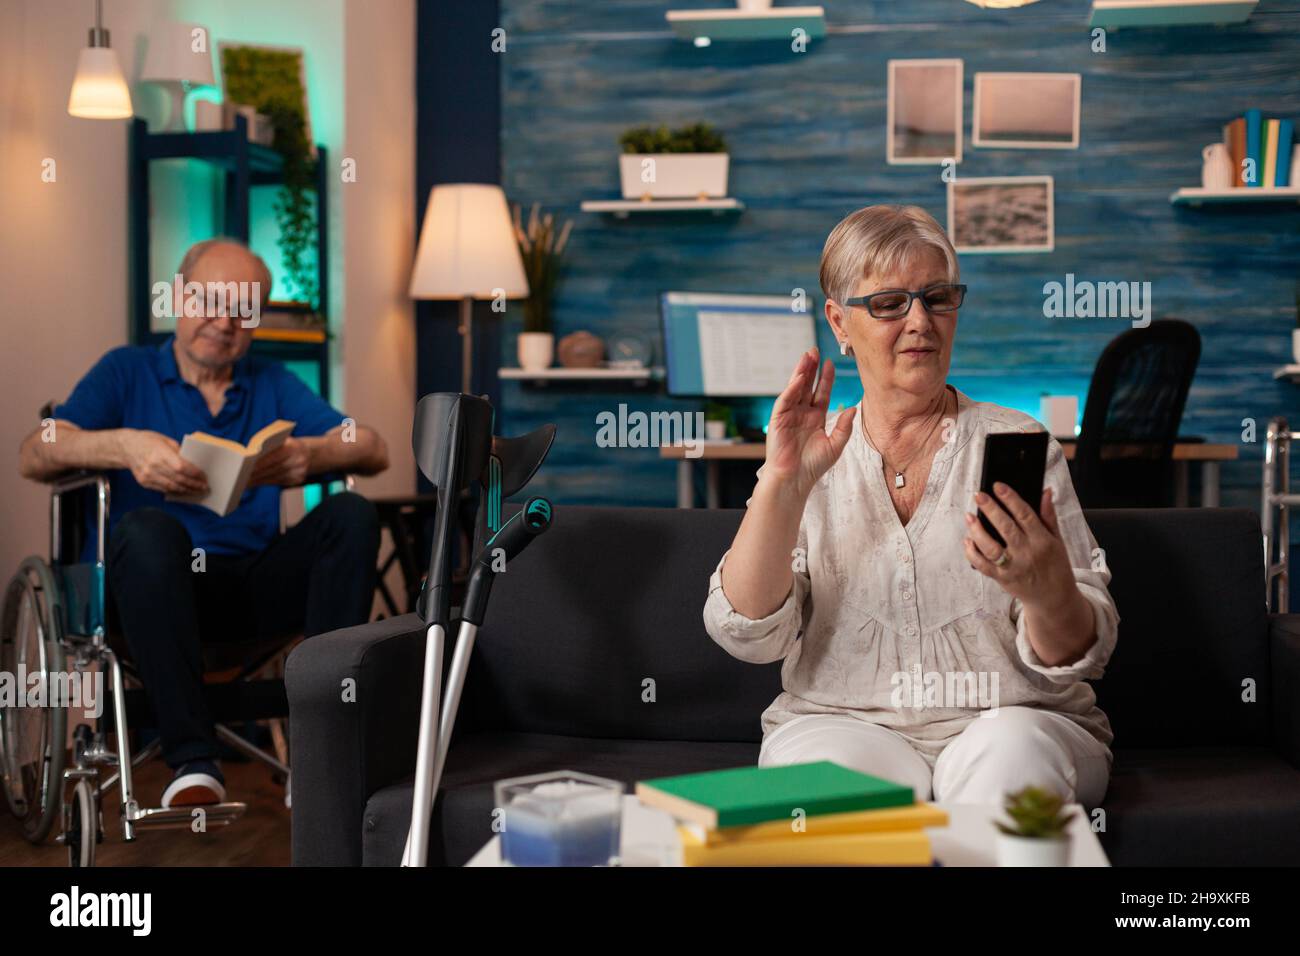 Caucasian old woman talking on video call with smartphone on living room sofa. Person using online remote conference while disabled senior man sitting in wheelchair with book in background Stock Photo